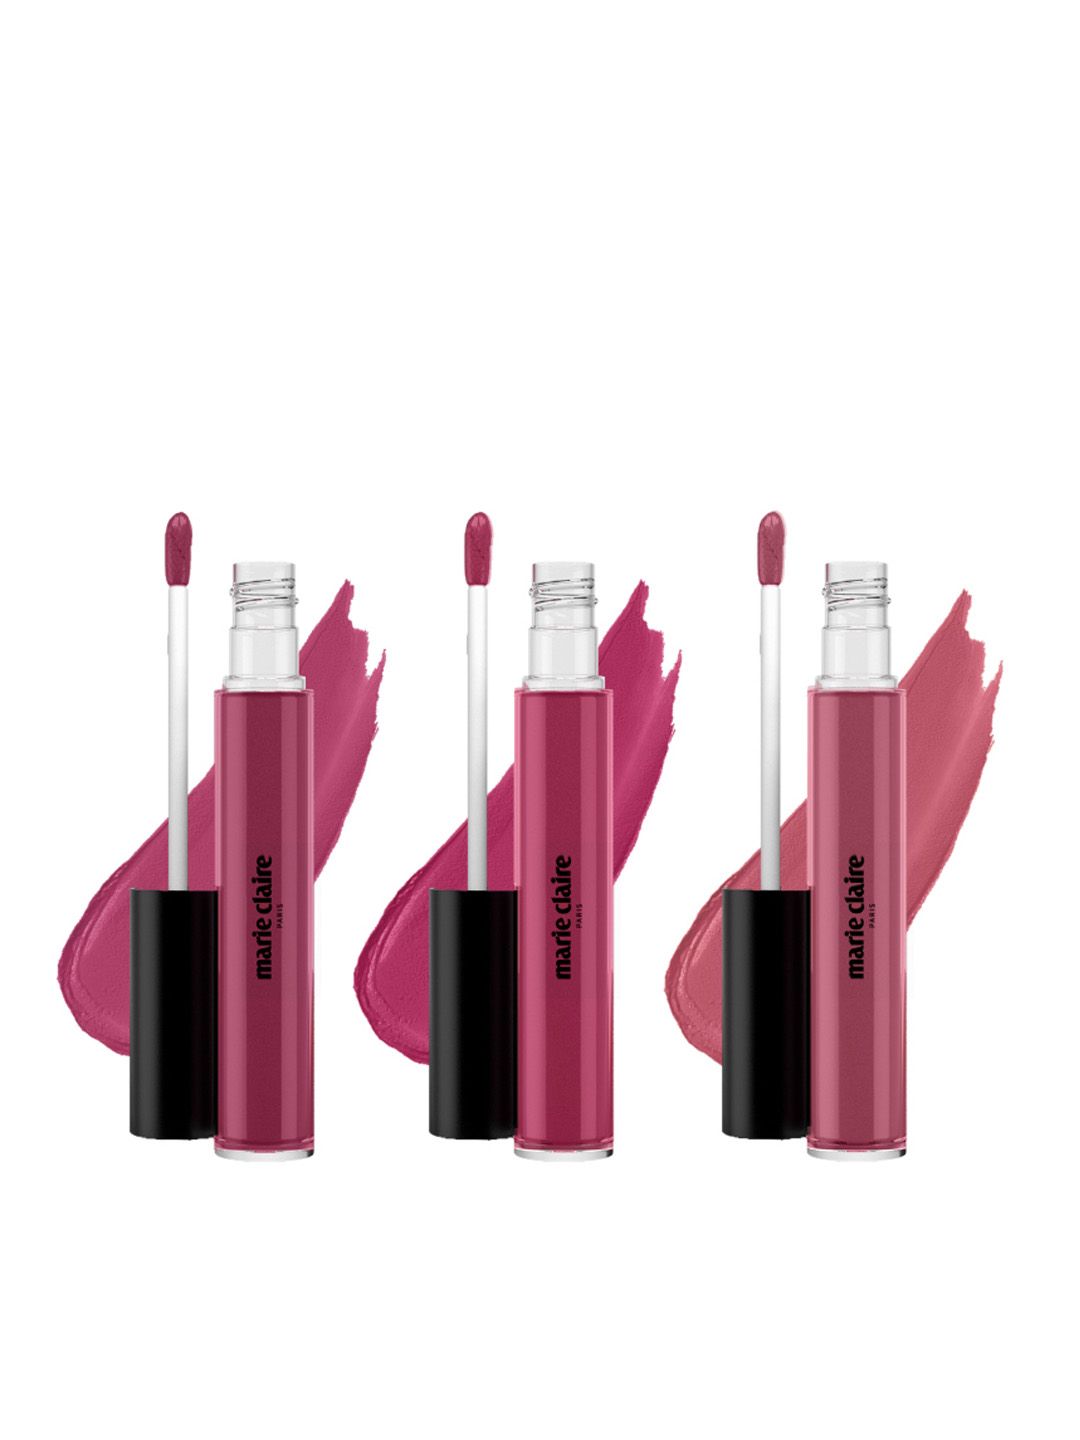 Marie Claire Paris Set of 3 Lip Creme 2.7 g Each - Perky Pink-Romantique Rose & Lady Lilac Price in India